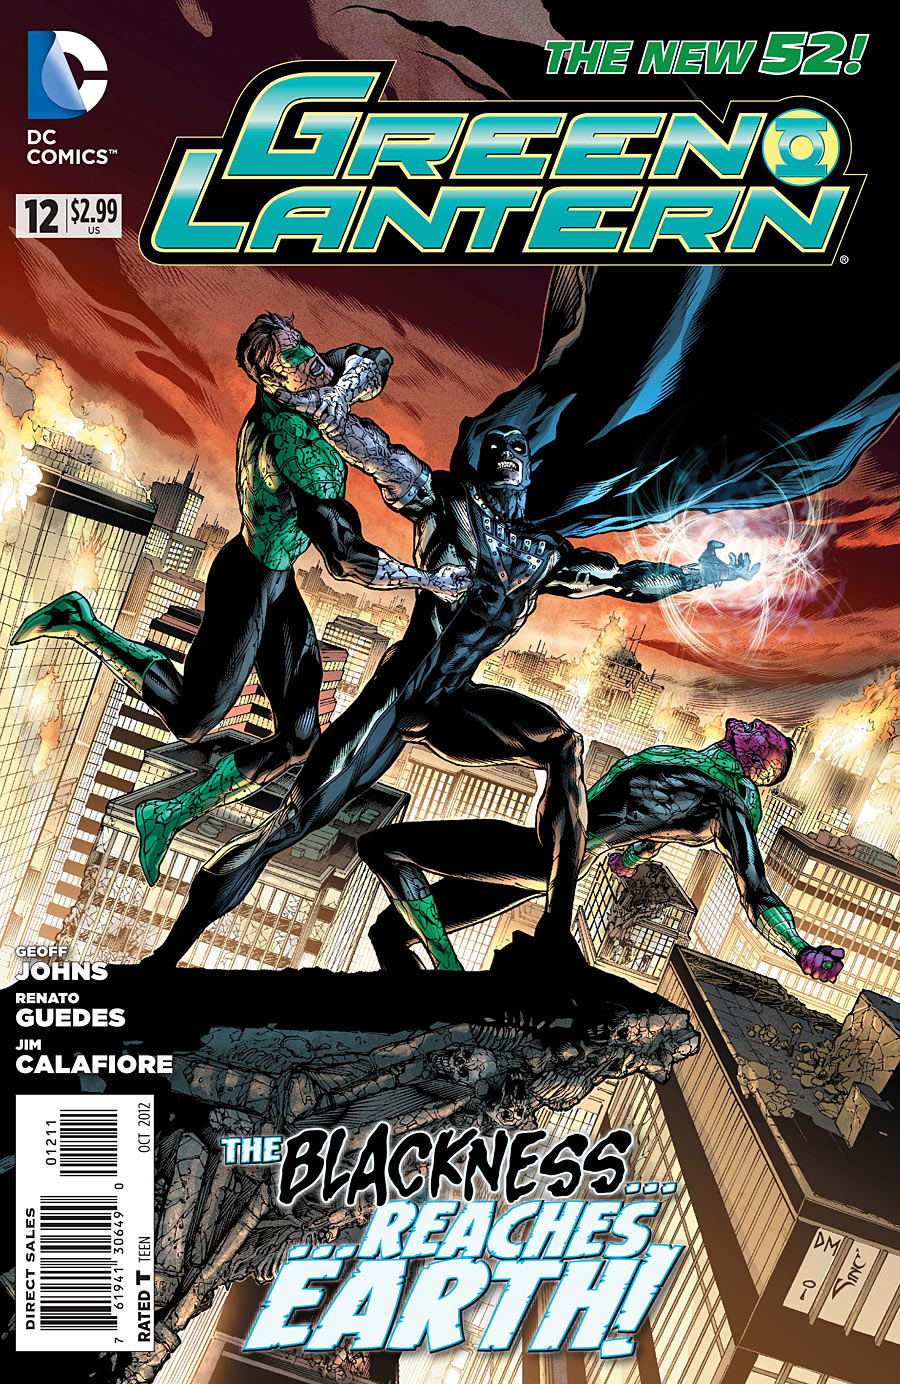 Issue 12 cover for Green Lantern